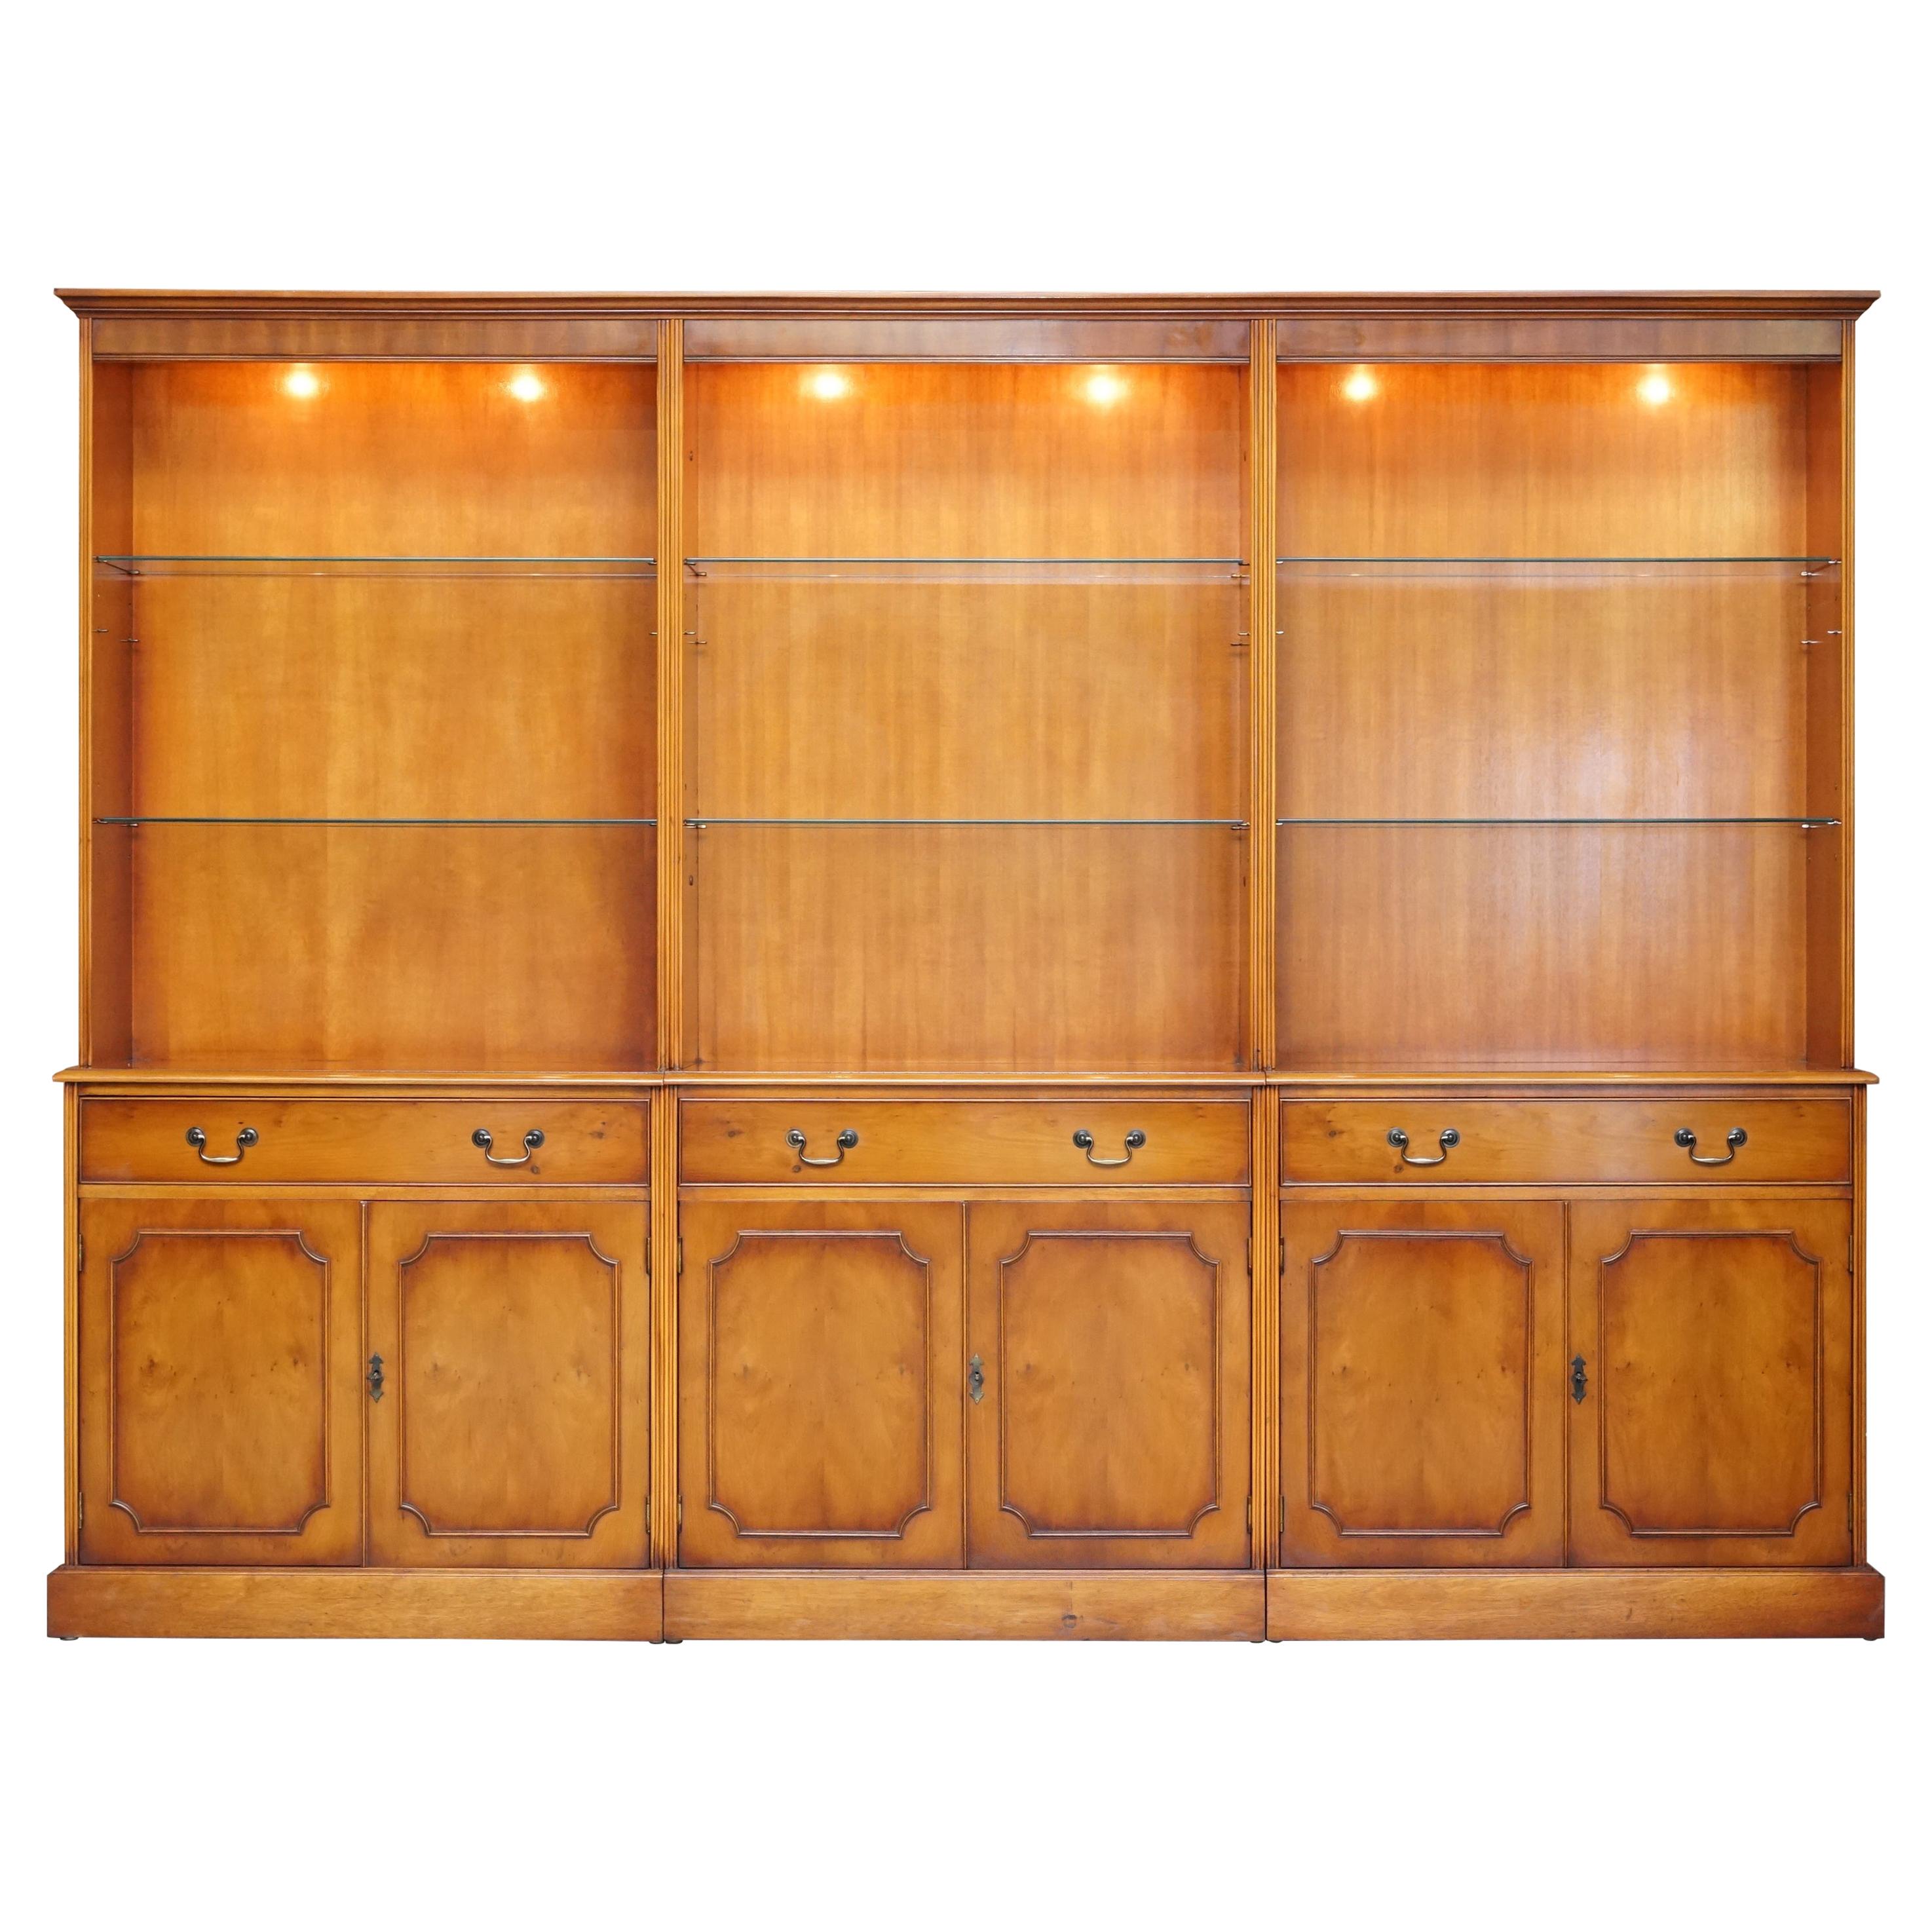 Triple Bank Bradley Furniture Burr Yew Wood Library Display Bookcase with Lights